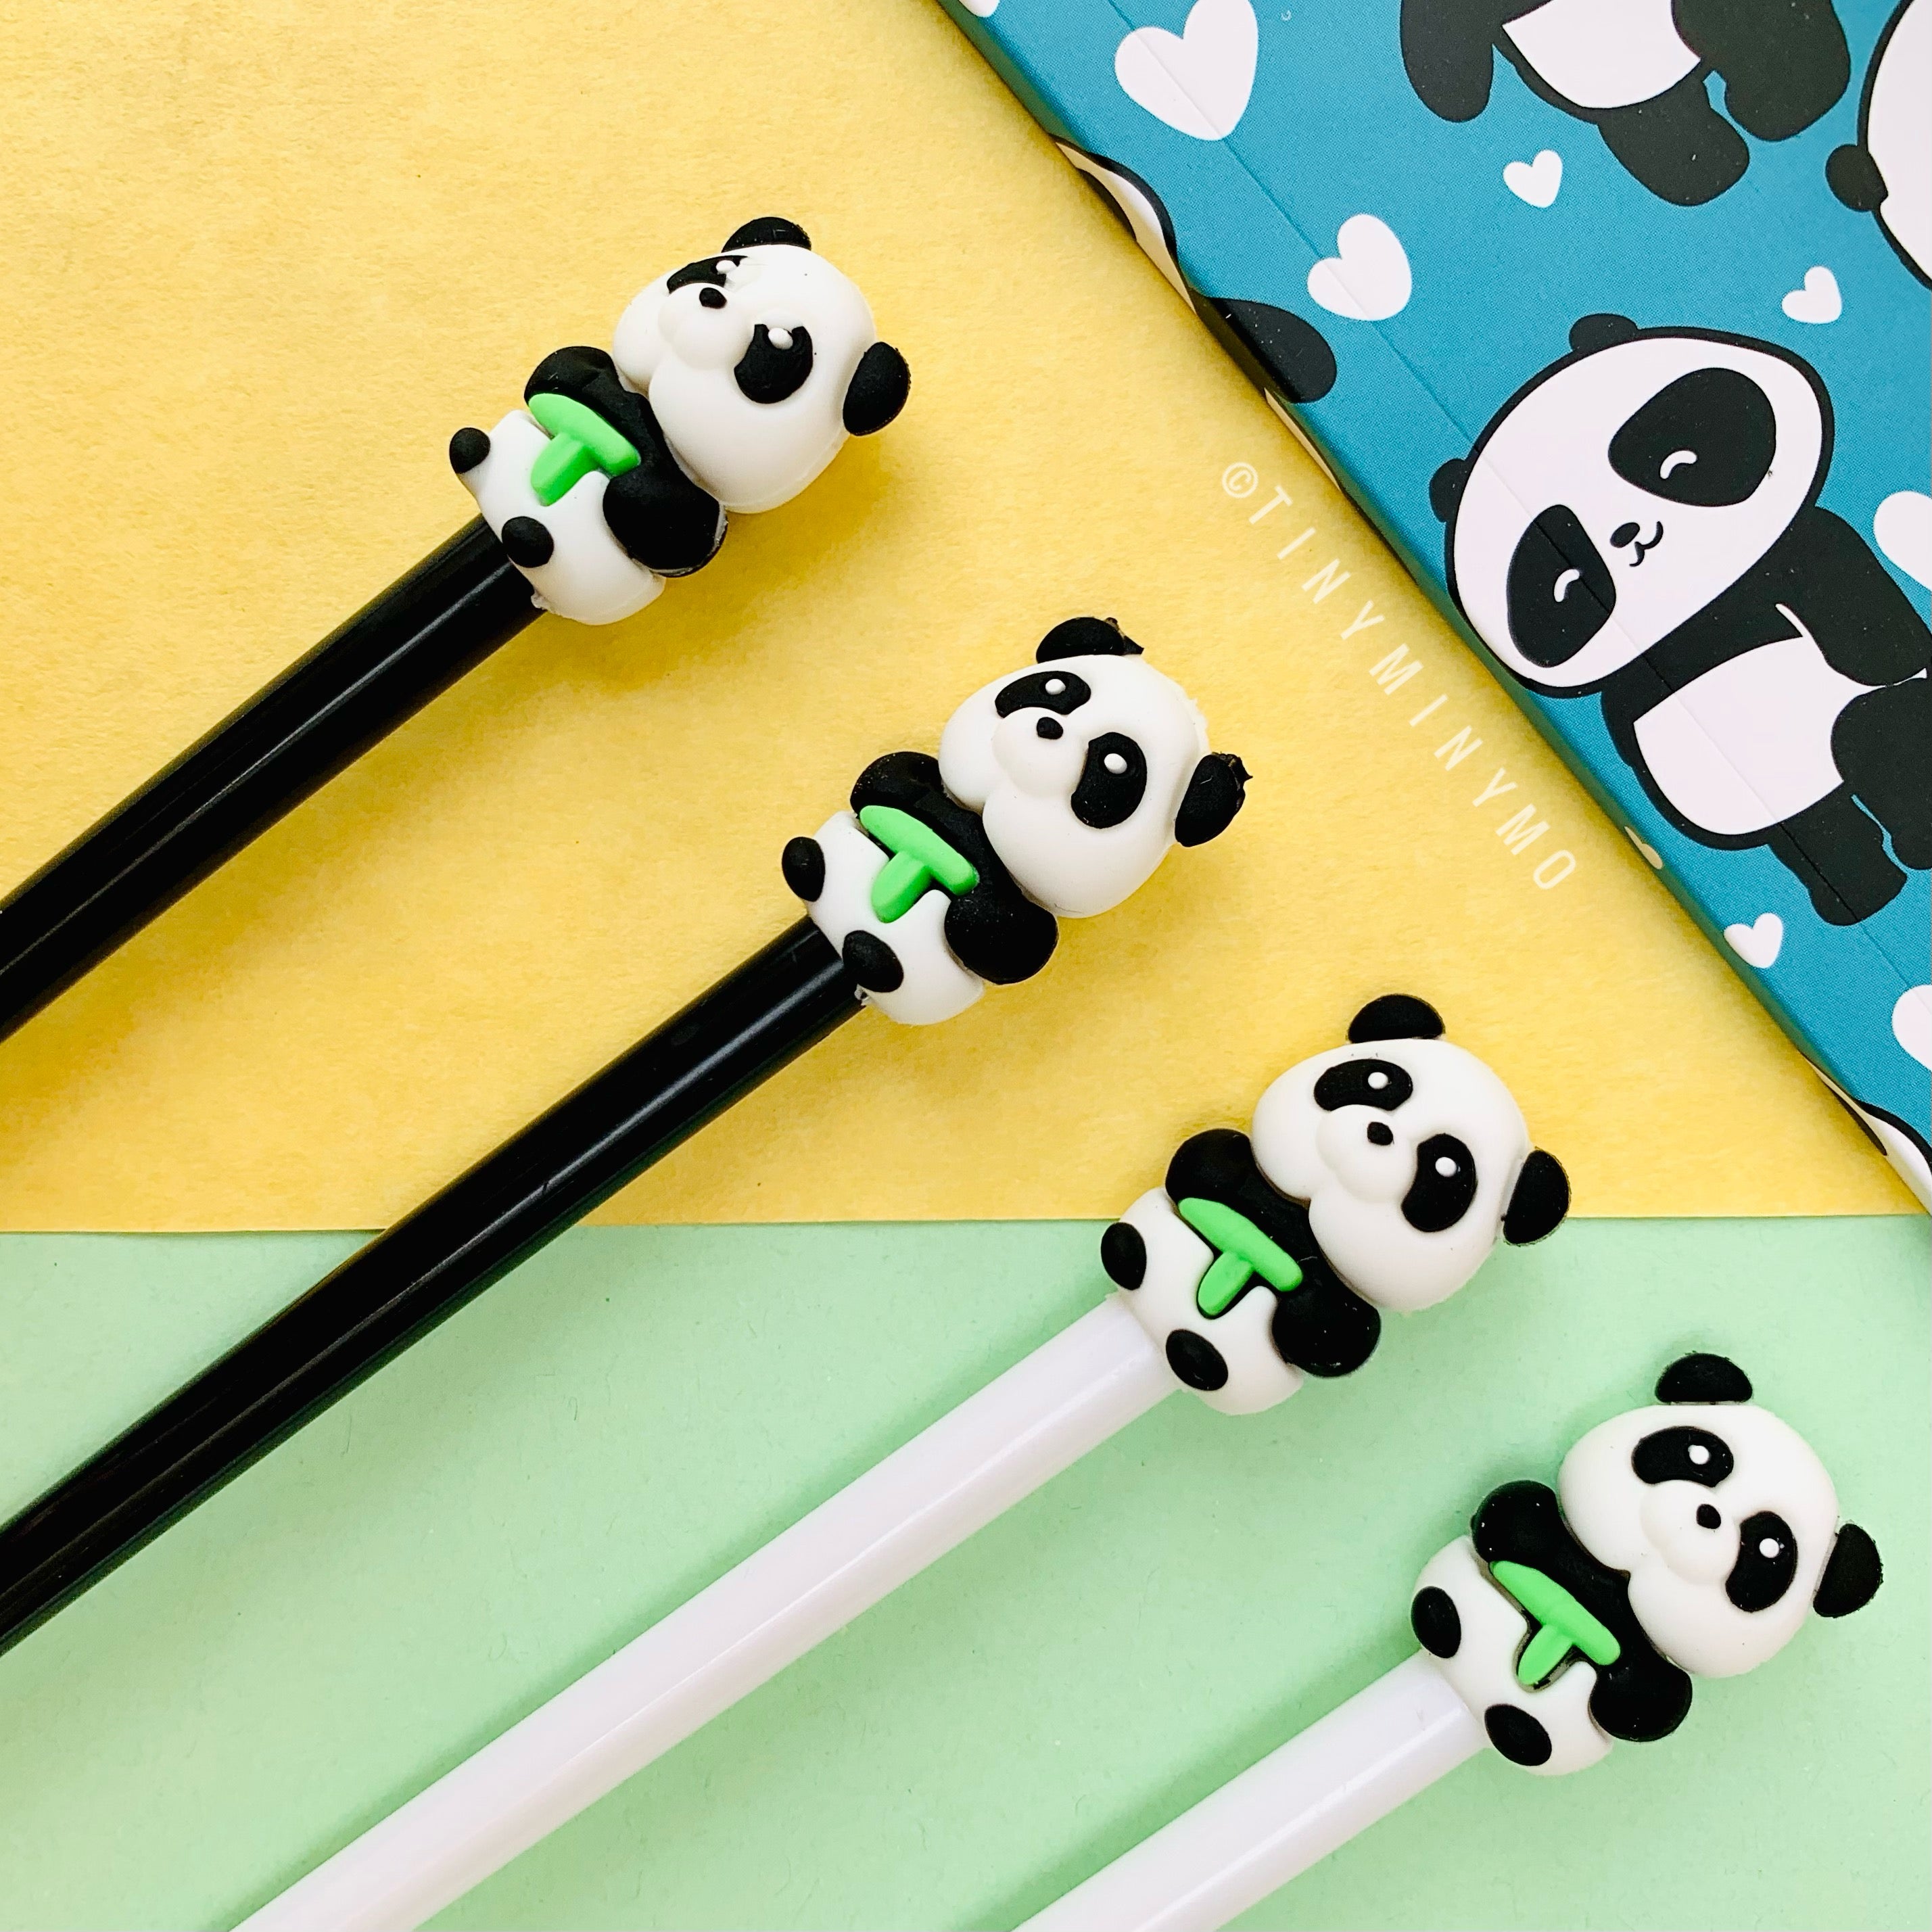 Top 10 panda gifts ideas and inspiration